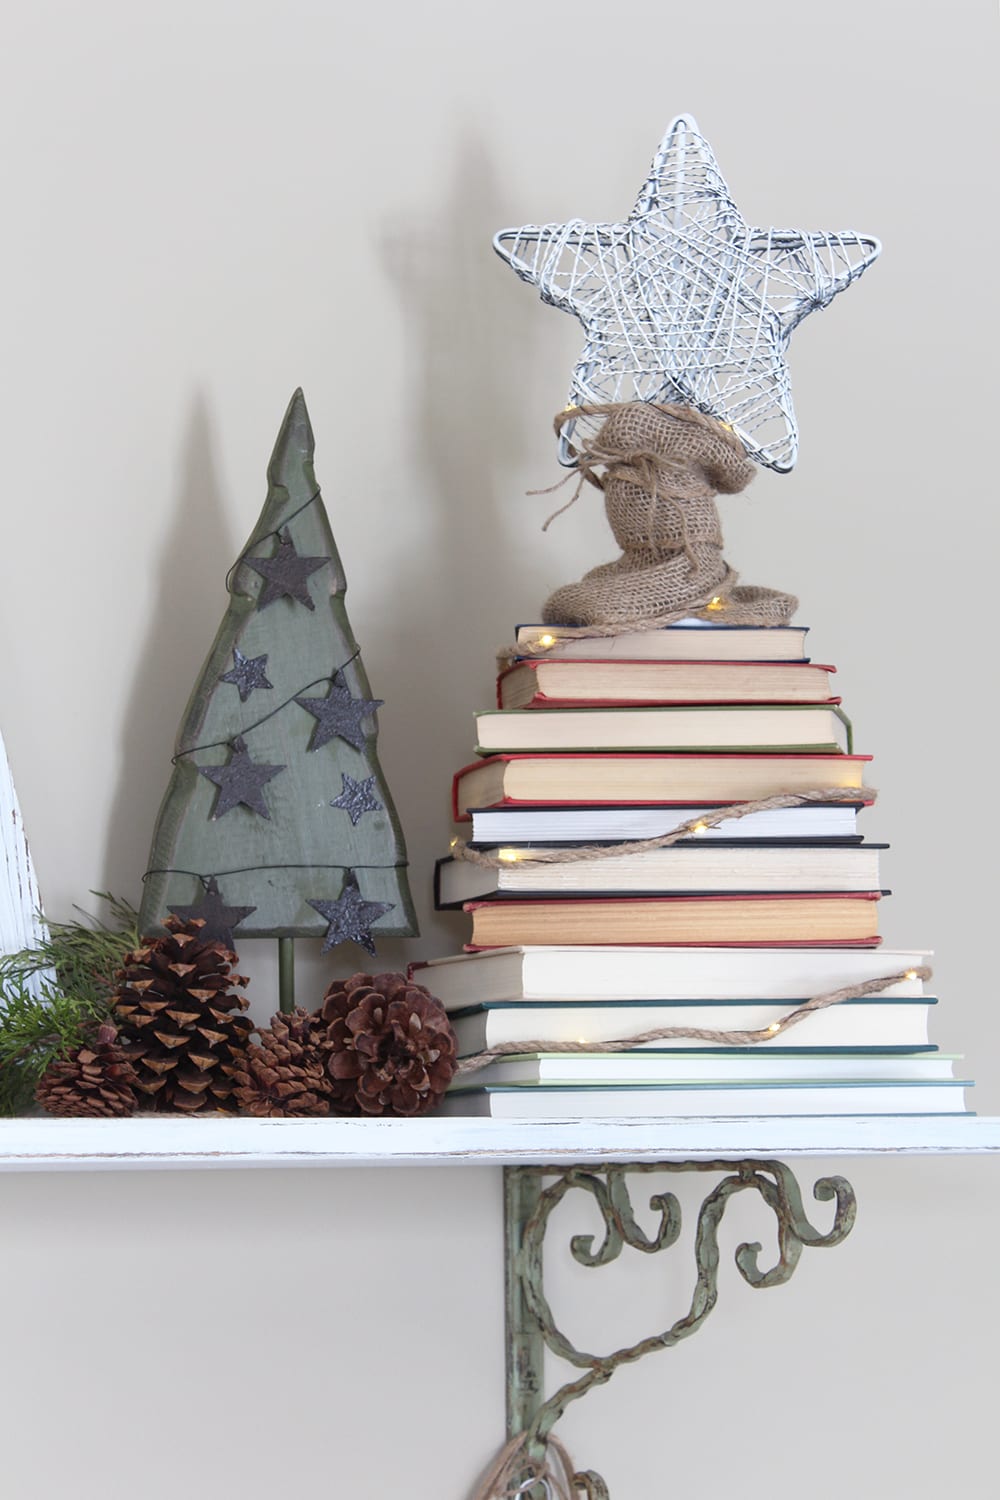 Nature inspired holiday decor alongside a Christmas tree made from a stack of books. For the book nerd in all of us!